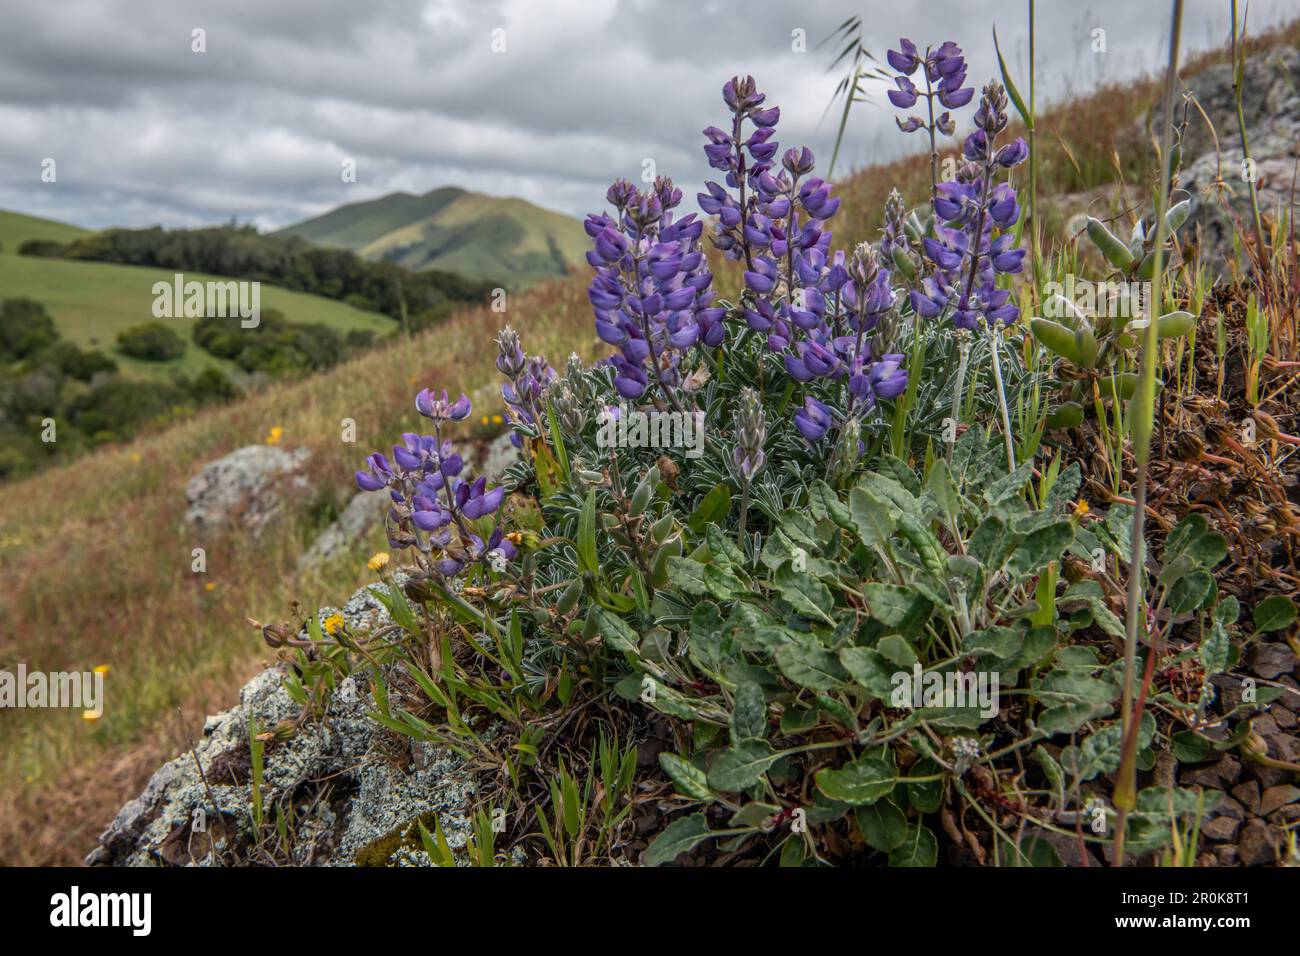 Beautiful wild flowers, Lupinus nanus known as sky or dwarf lupine, blooming on a California hillside in Marin county. Stock Photo